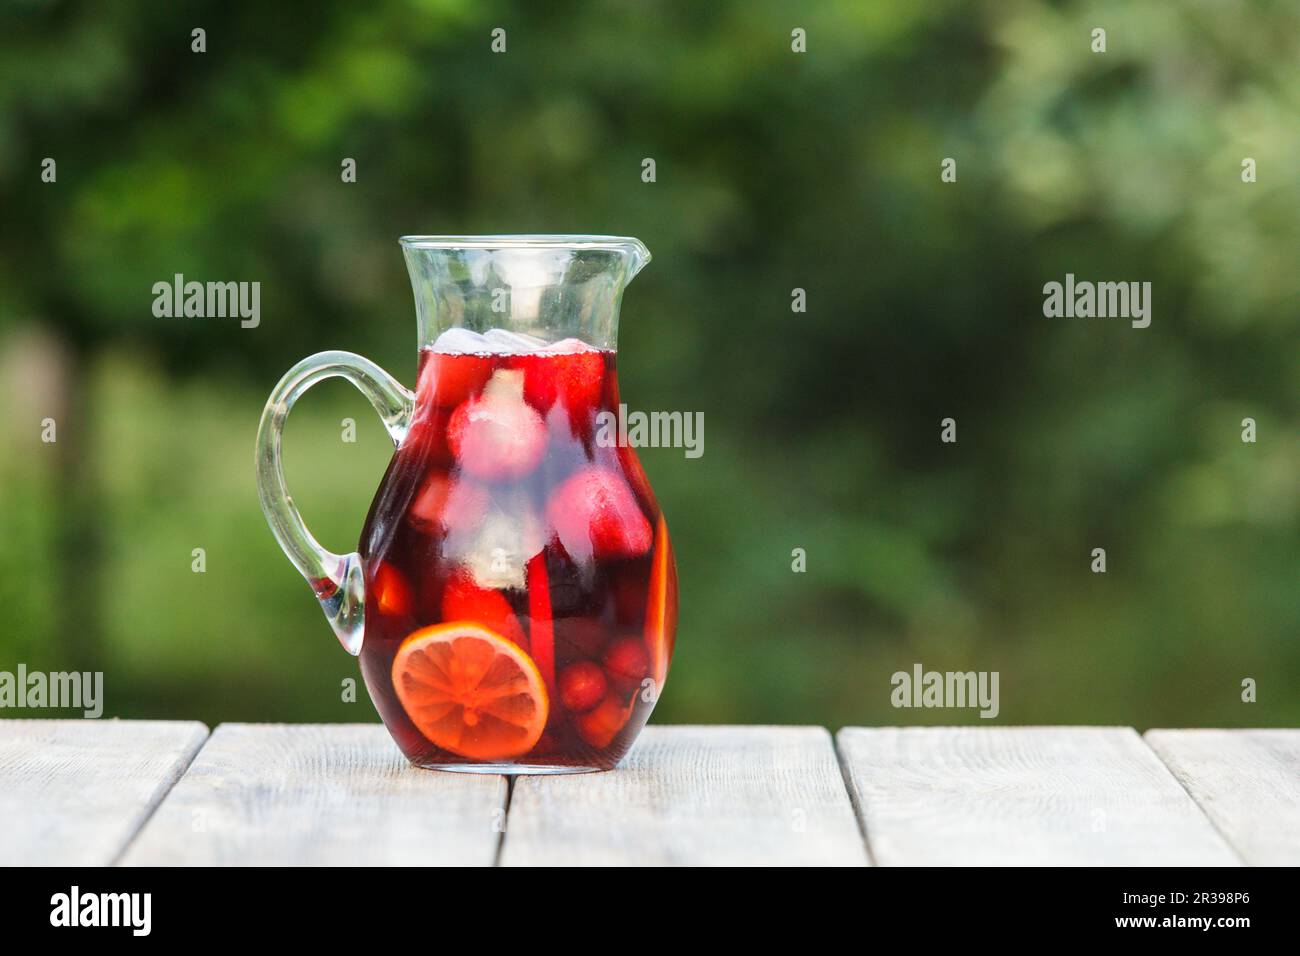 https://c8.alamy.com/comp/2R398P6/refreshing-sangria-or-punch-with-fruits-in-pincher-2R398P6.jpg